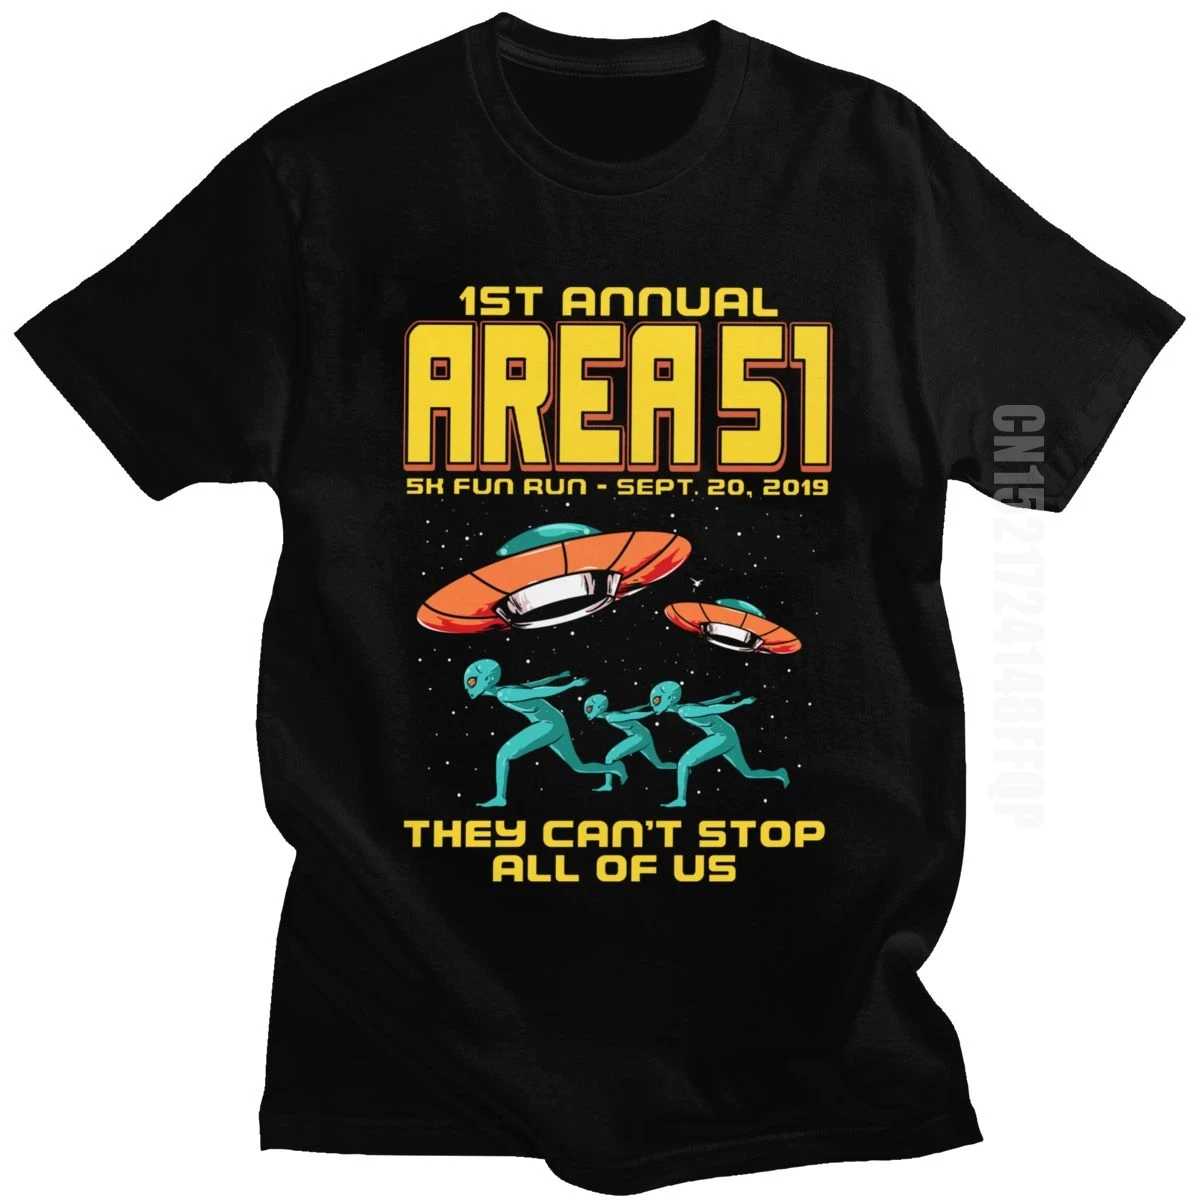 5k Fun Run Men They Can't Stop All Of Us T Shirt Storm Area 51 Alien UFO Space Ship Saucer Clothes Vintage Tees T-Shirt For Male